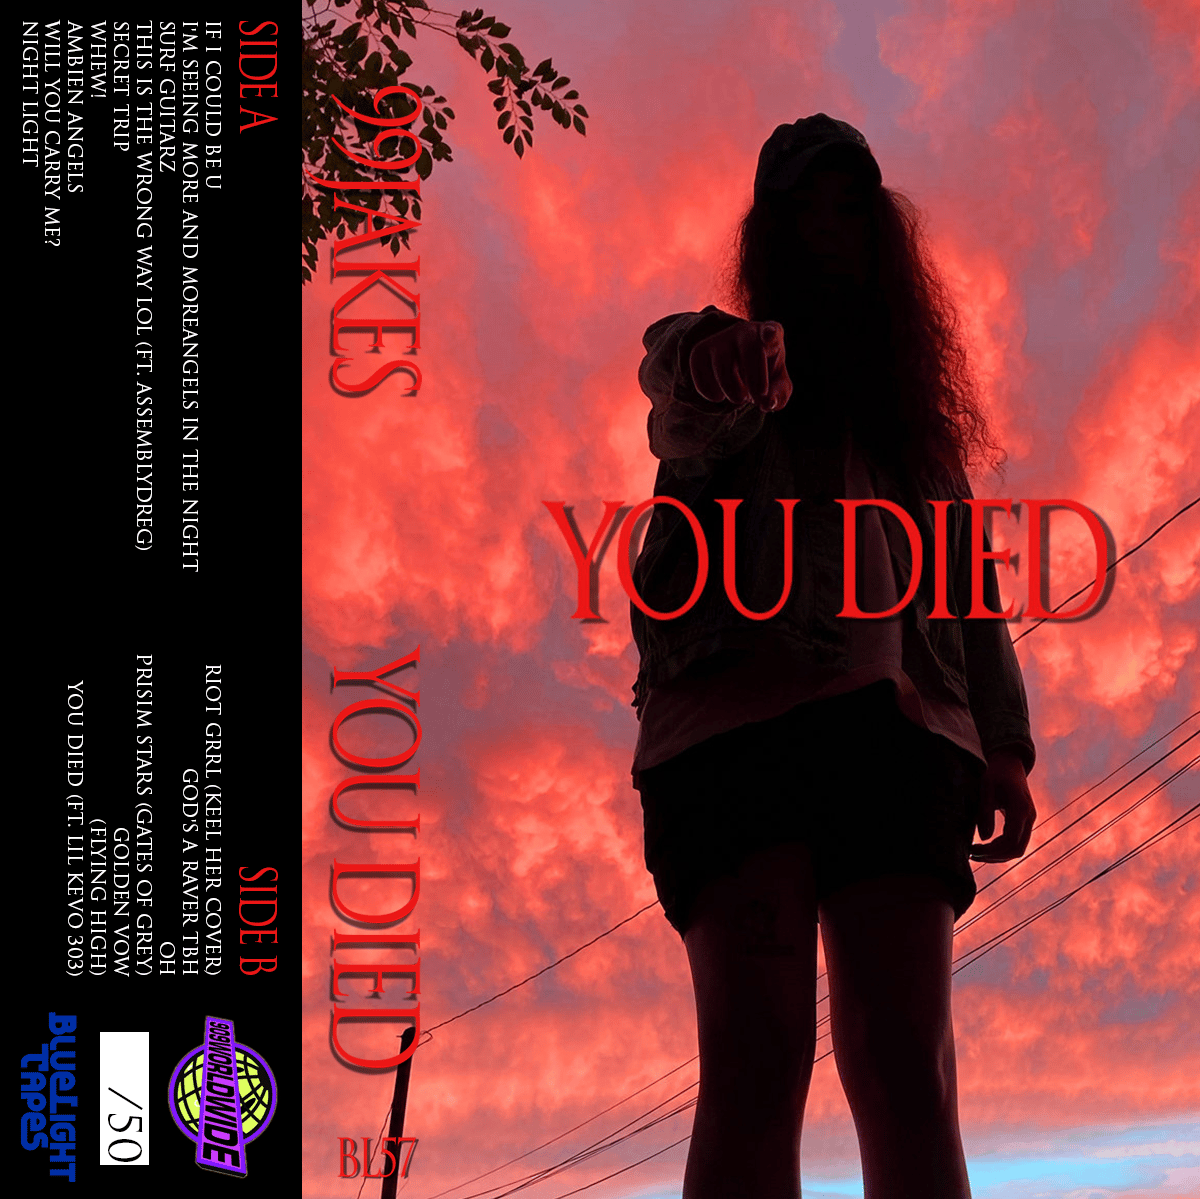 99jakes - YOU DIED